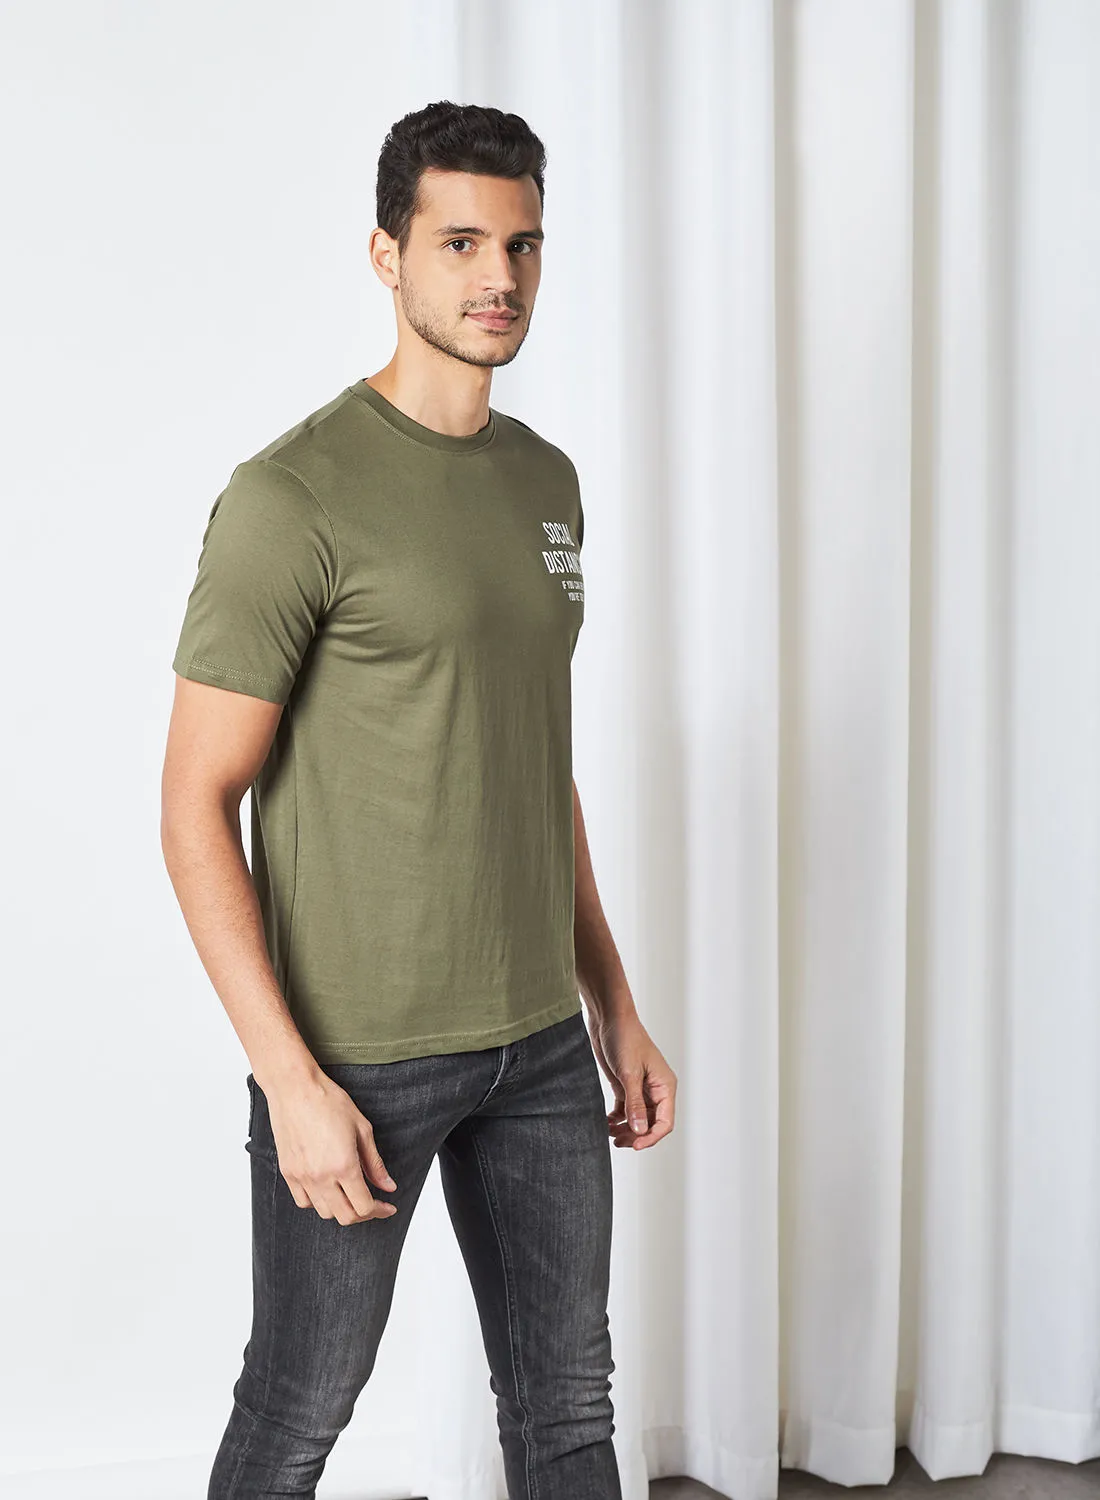 STATE 8 Social Distancing Printed T-Shirt Olive